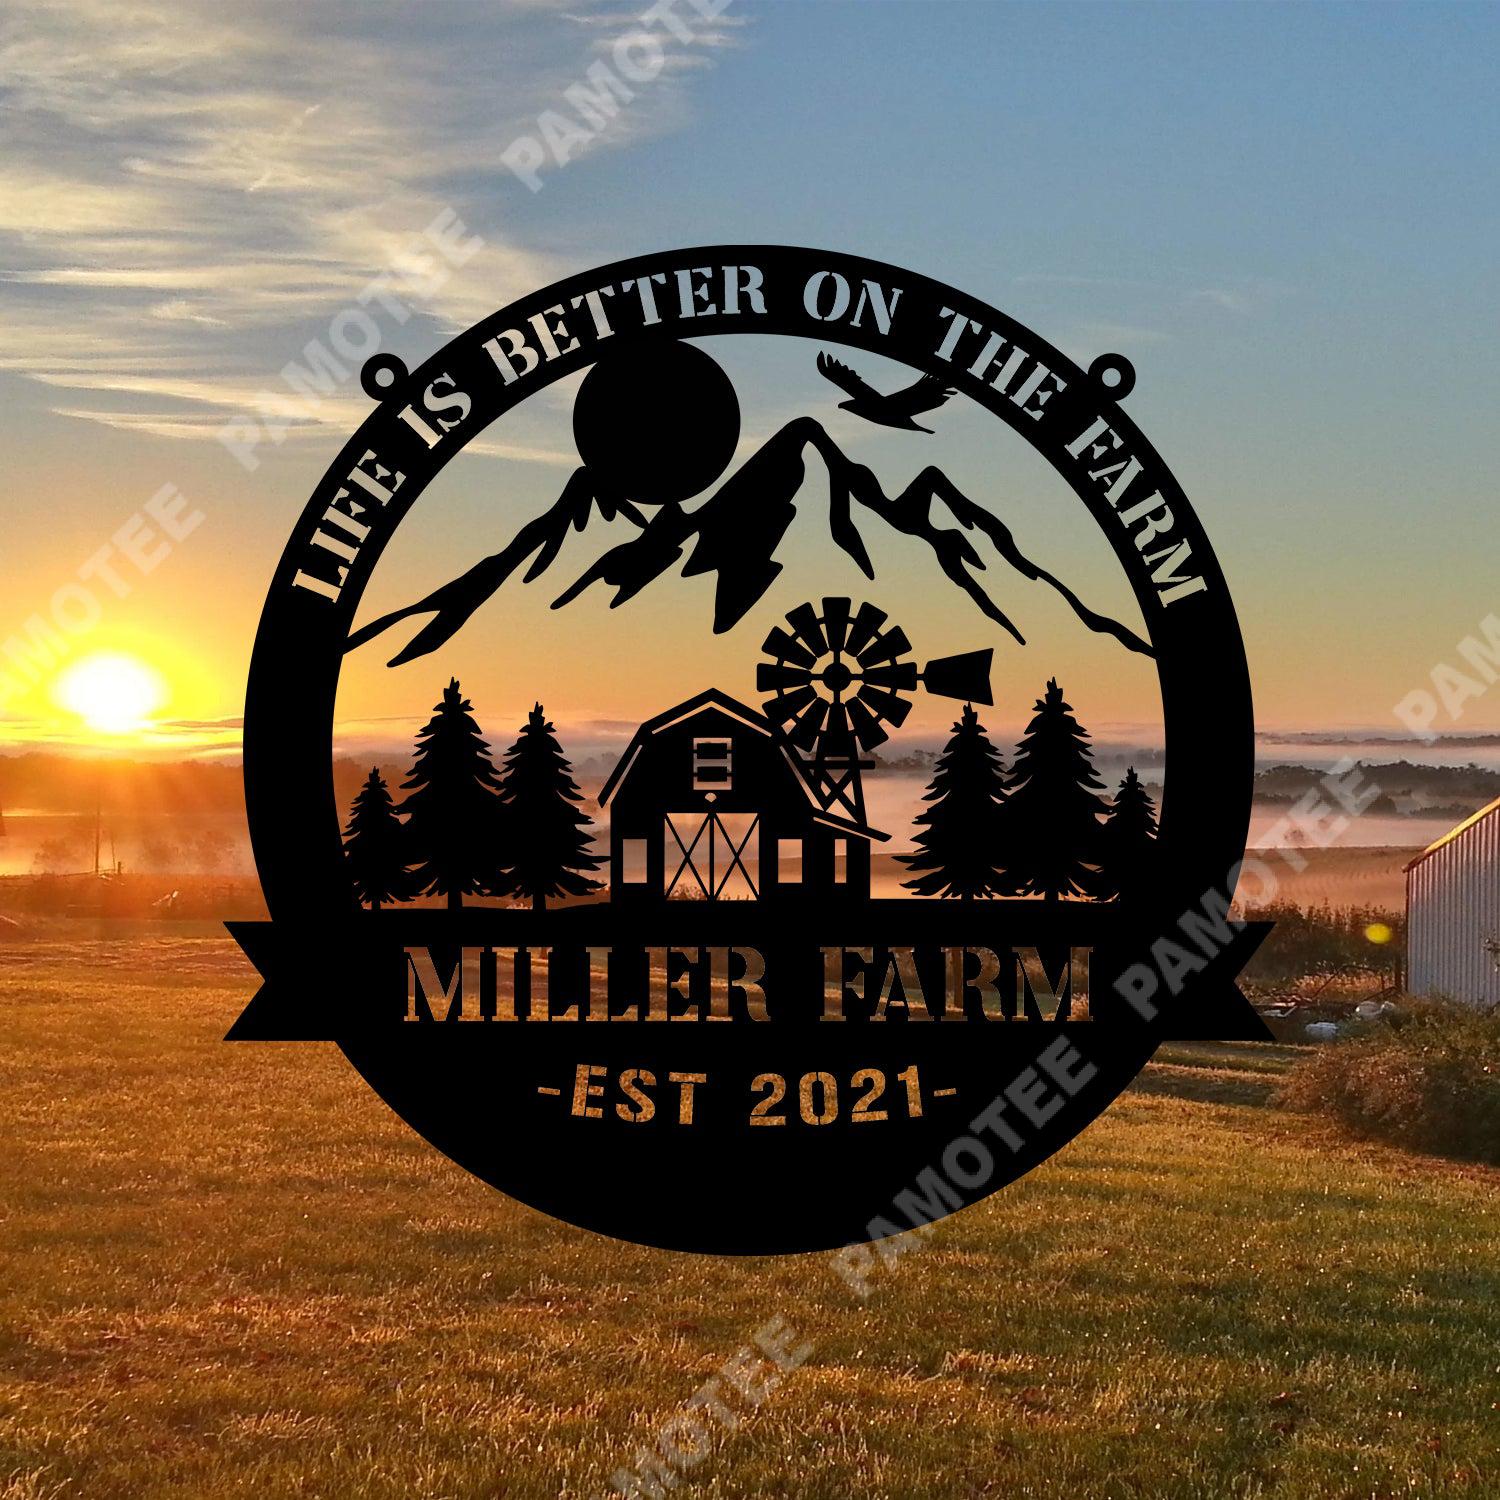 Life Is Better On The Farm Personalized Metal Sign, Mountain Farm Art